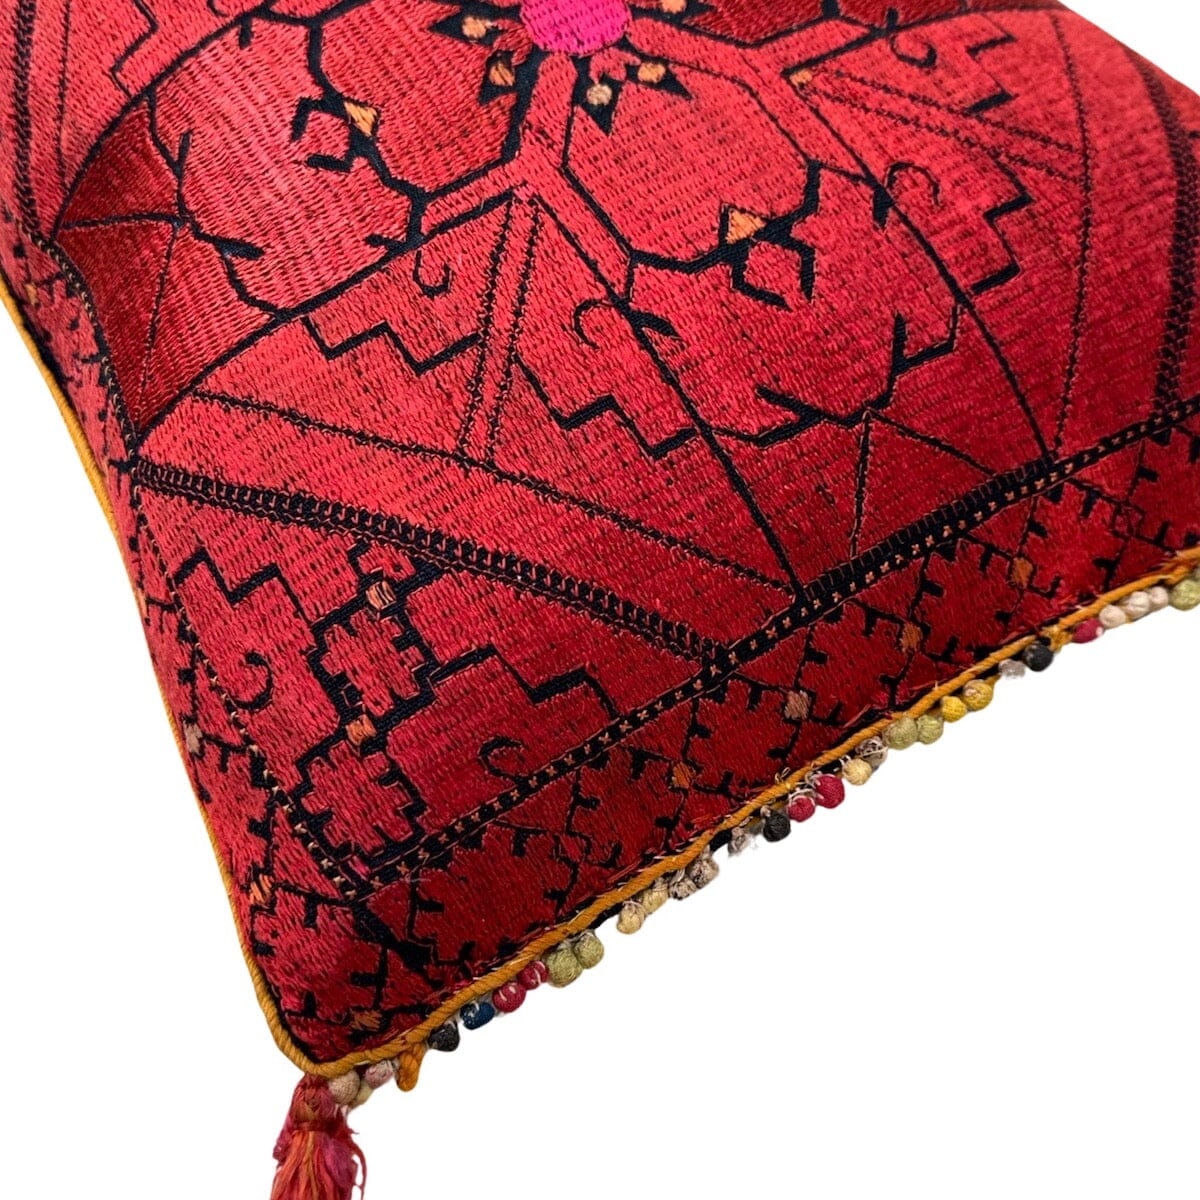 1920's Hand Embroidered Swat Valley Bridal Dowry Pillow (#M110123 | 13 x 28") New Pillows B. Viz Design 